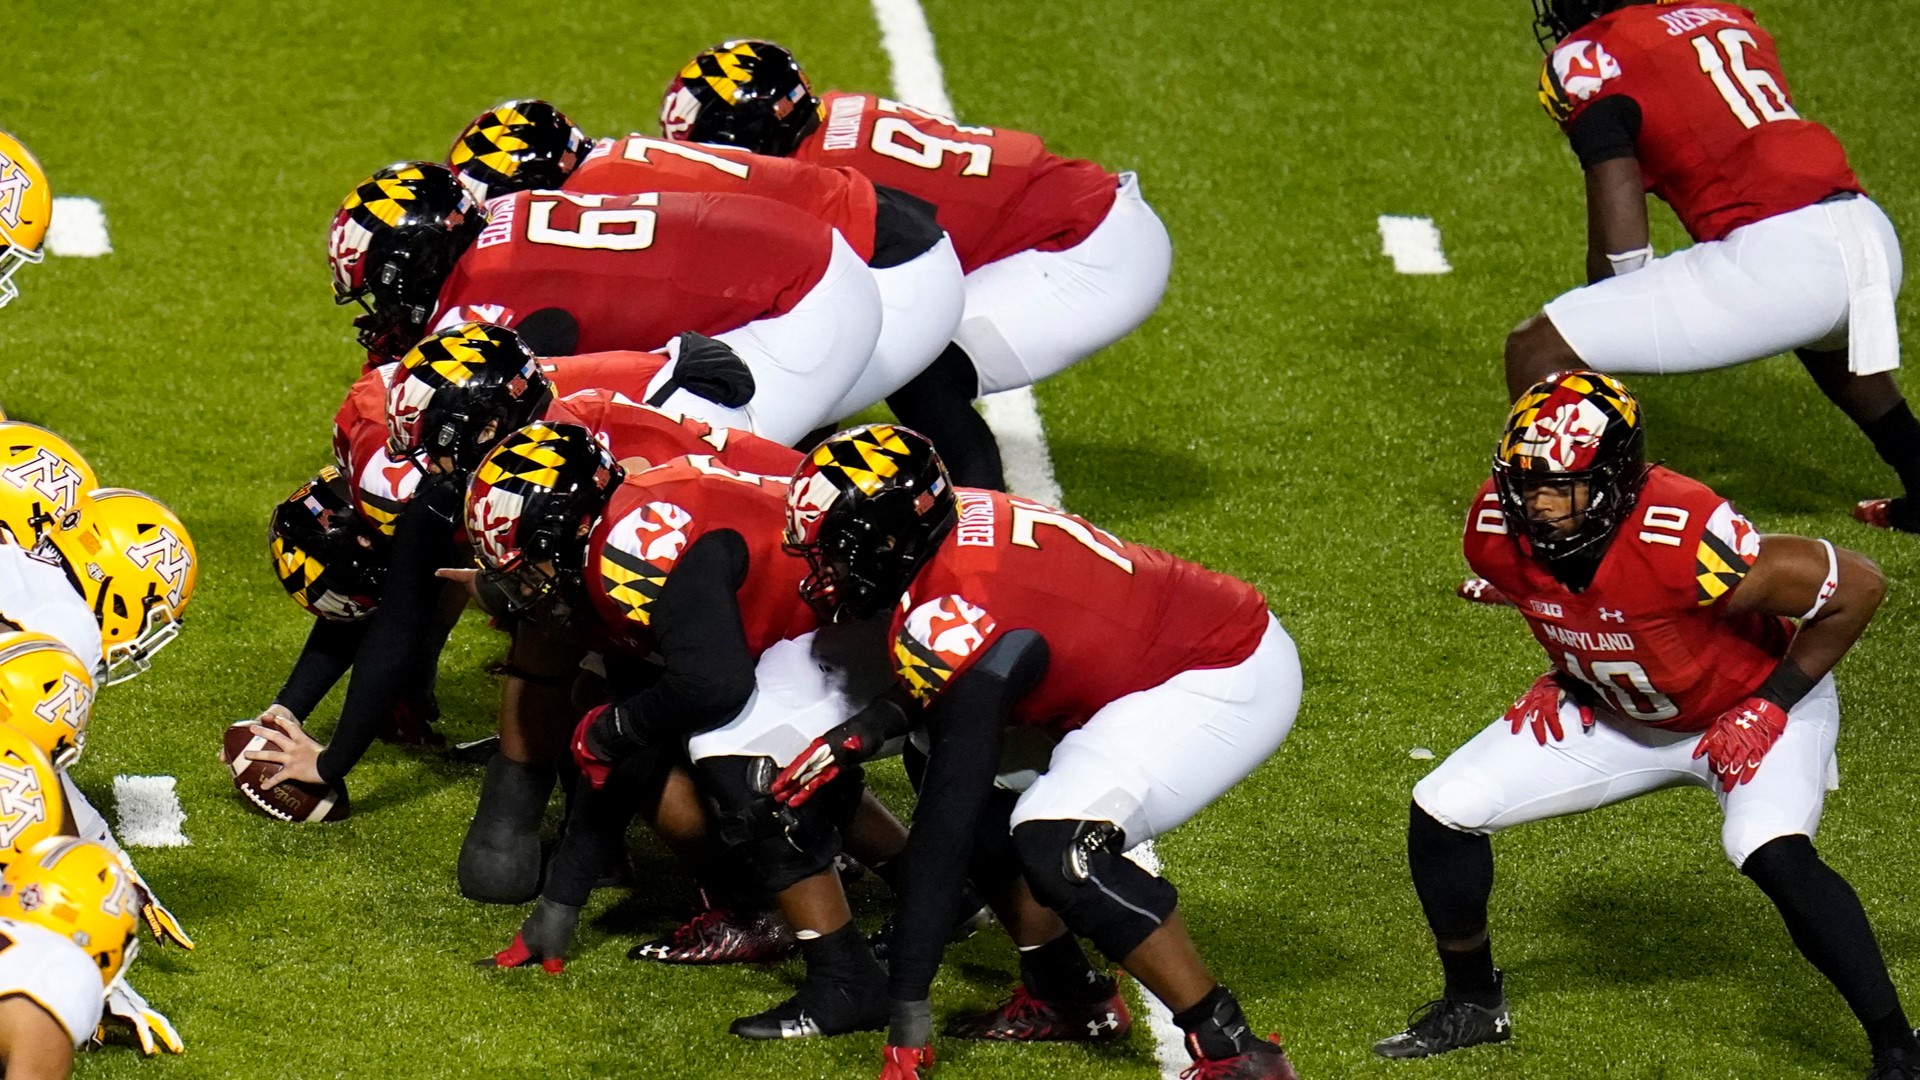 The Terps have not practiced in three days because of how COVID-19 has impacted the University of Maryland and its team.